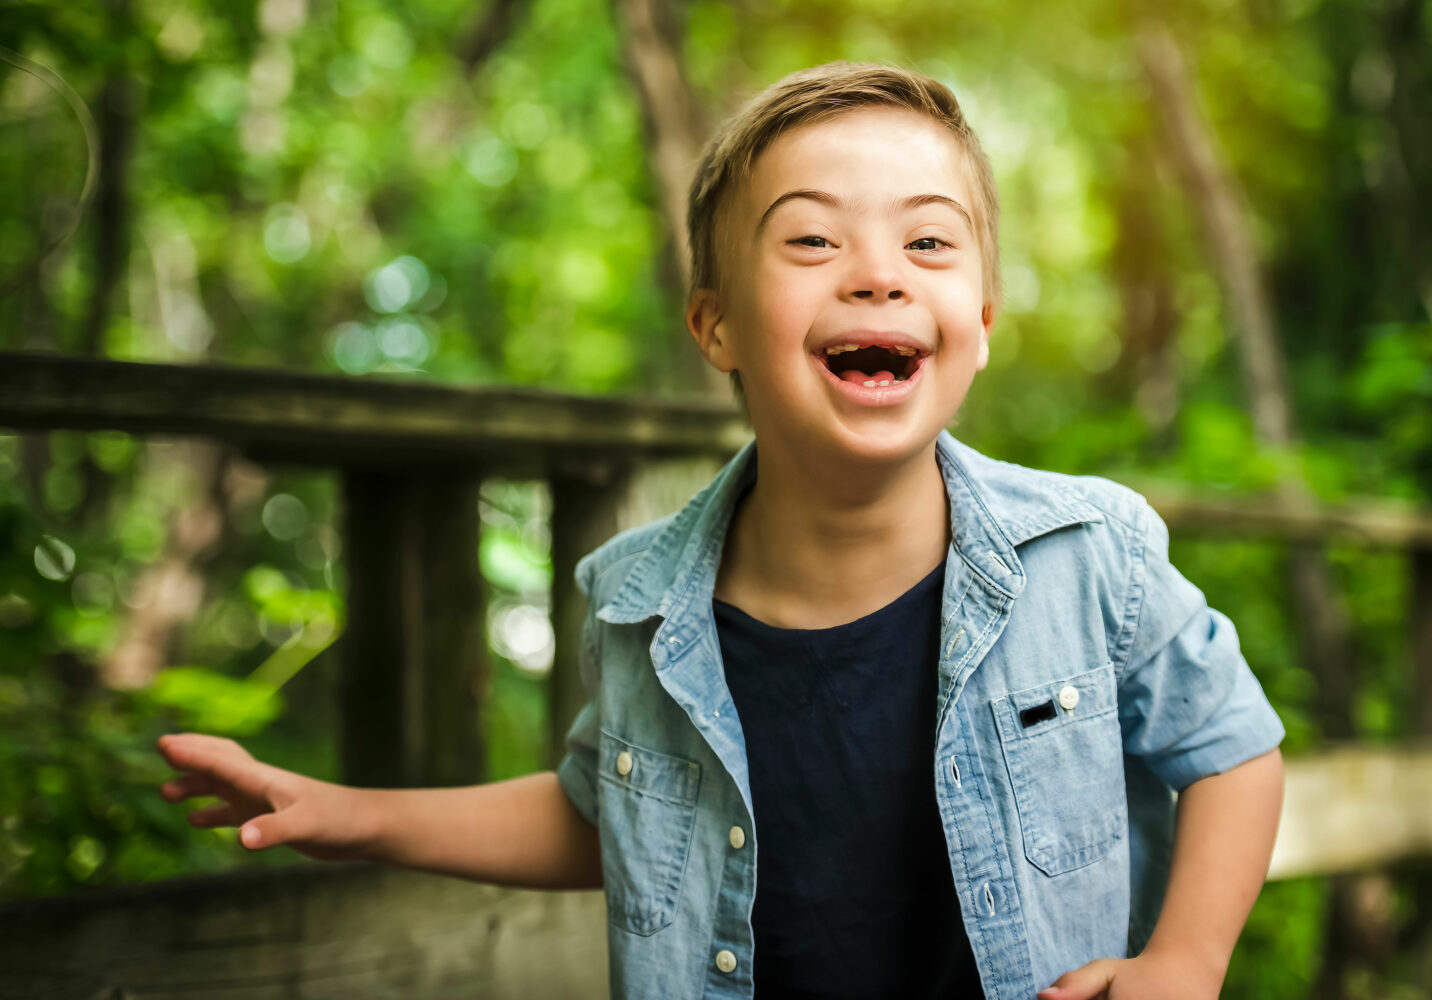 white, blonde haired boy with Down syndrome with black t-shirt and light blue shirt over top smiles on a bridge in the woods